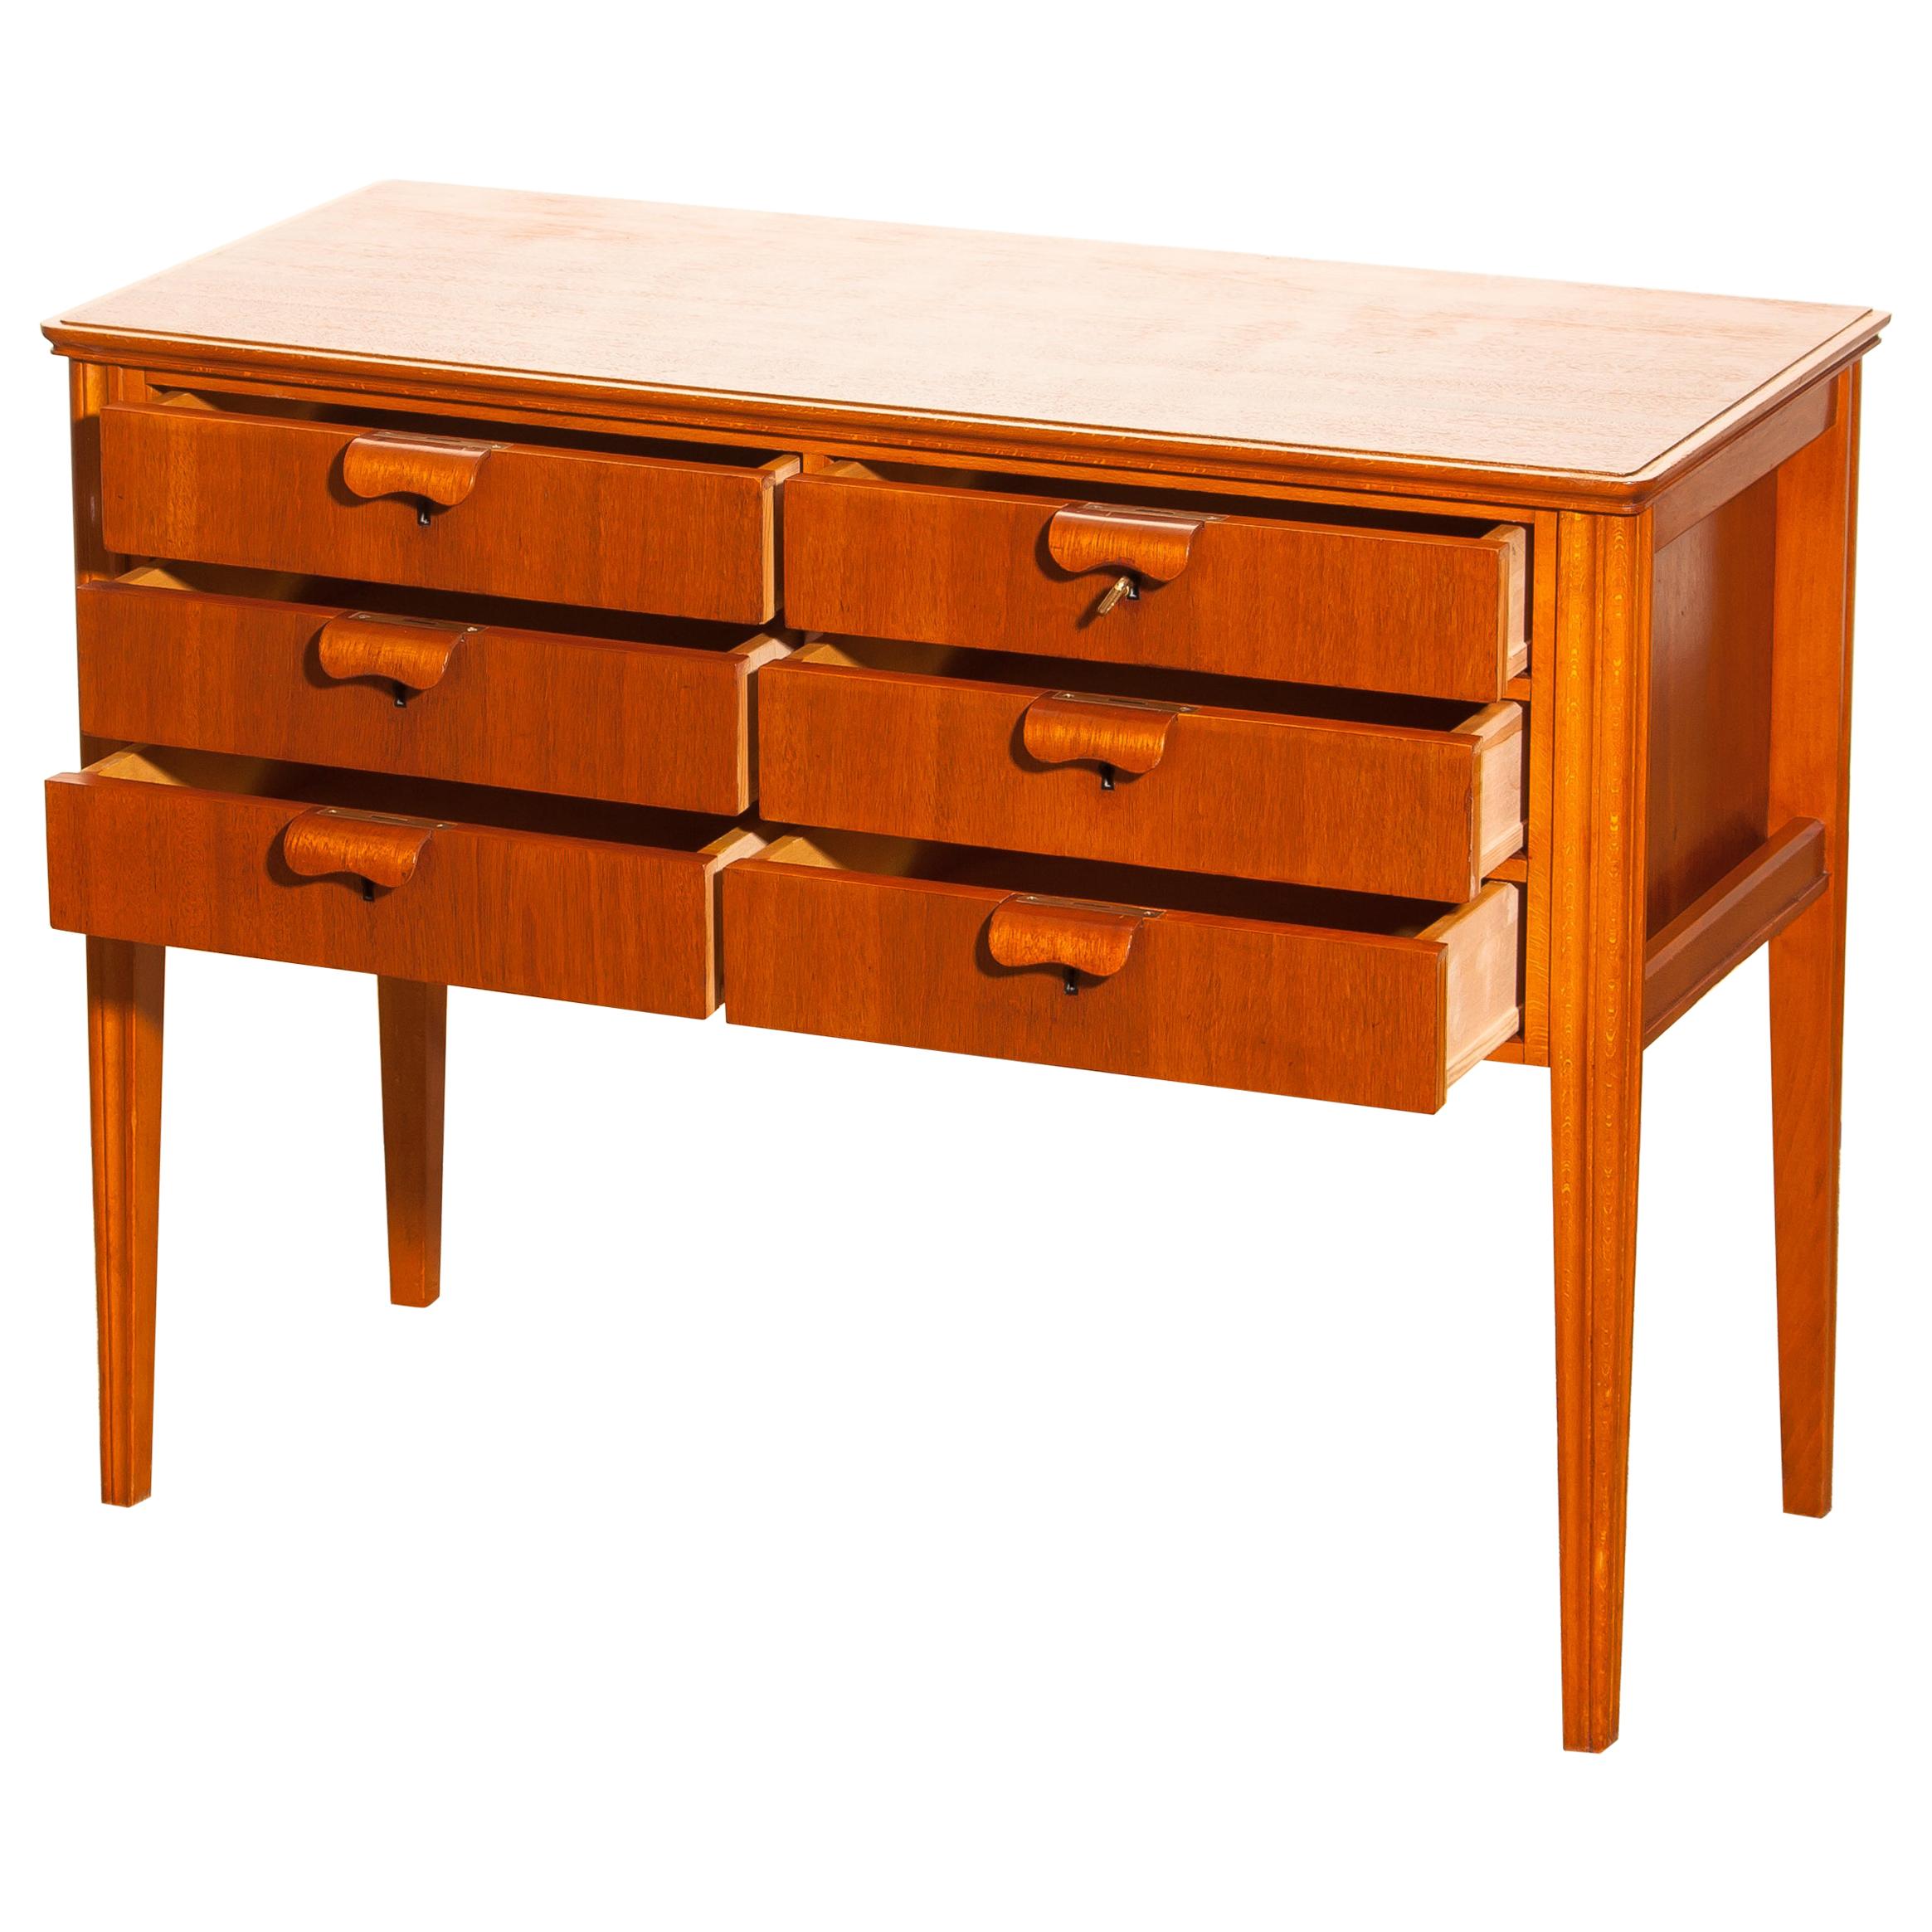 1950s, Teak and Beech Chest of Drawers by Ferdinand Lundquist